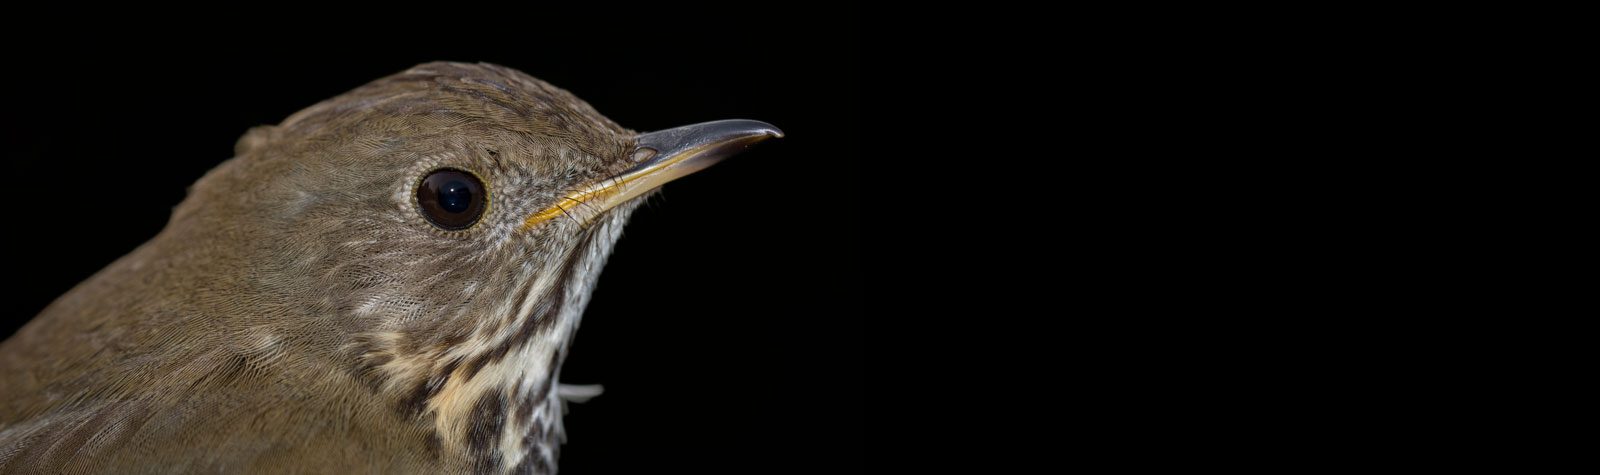 Close-up of a Bicknell's Thrush, isolated on black background. Photo credit Kent McFarland.